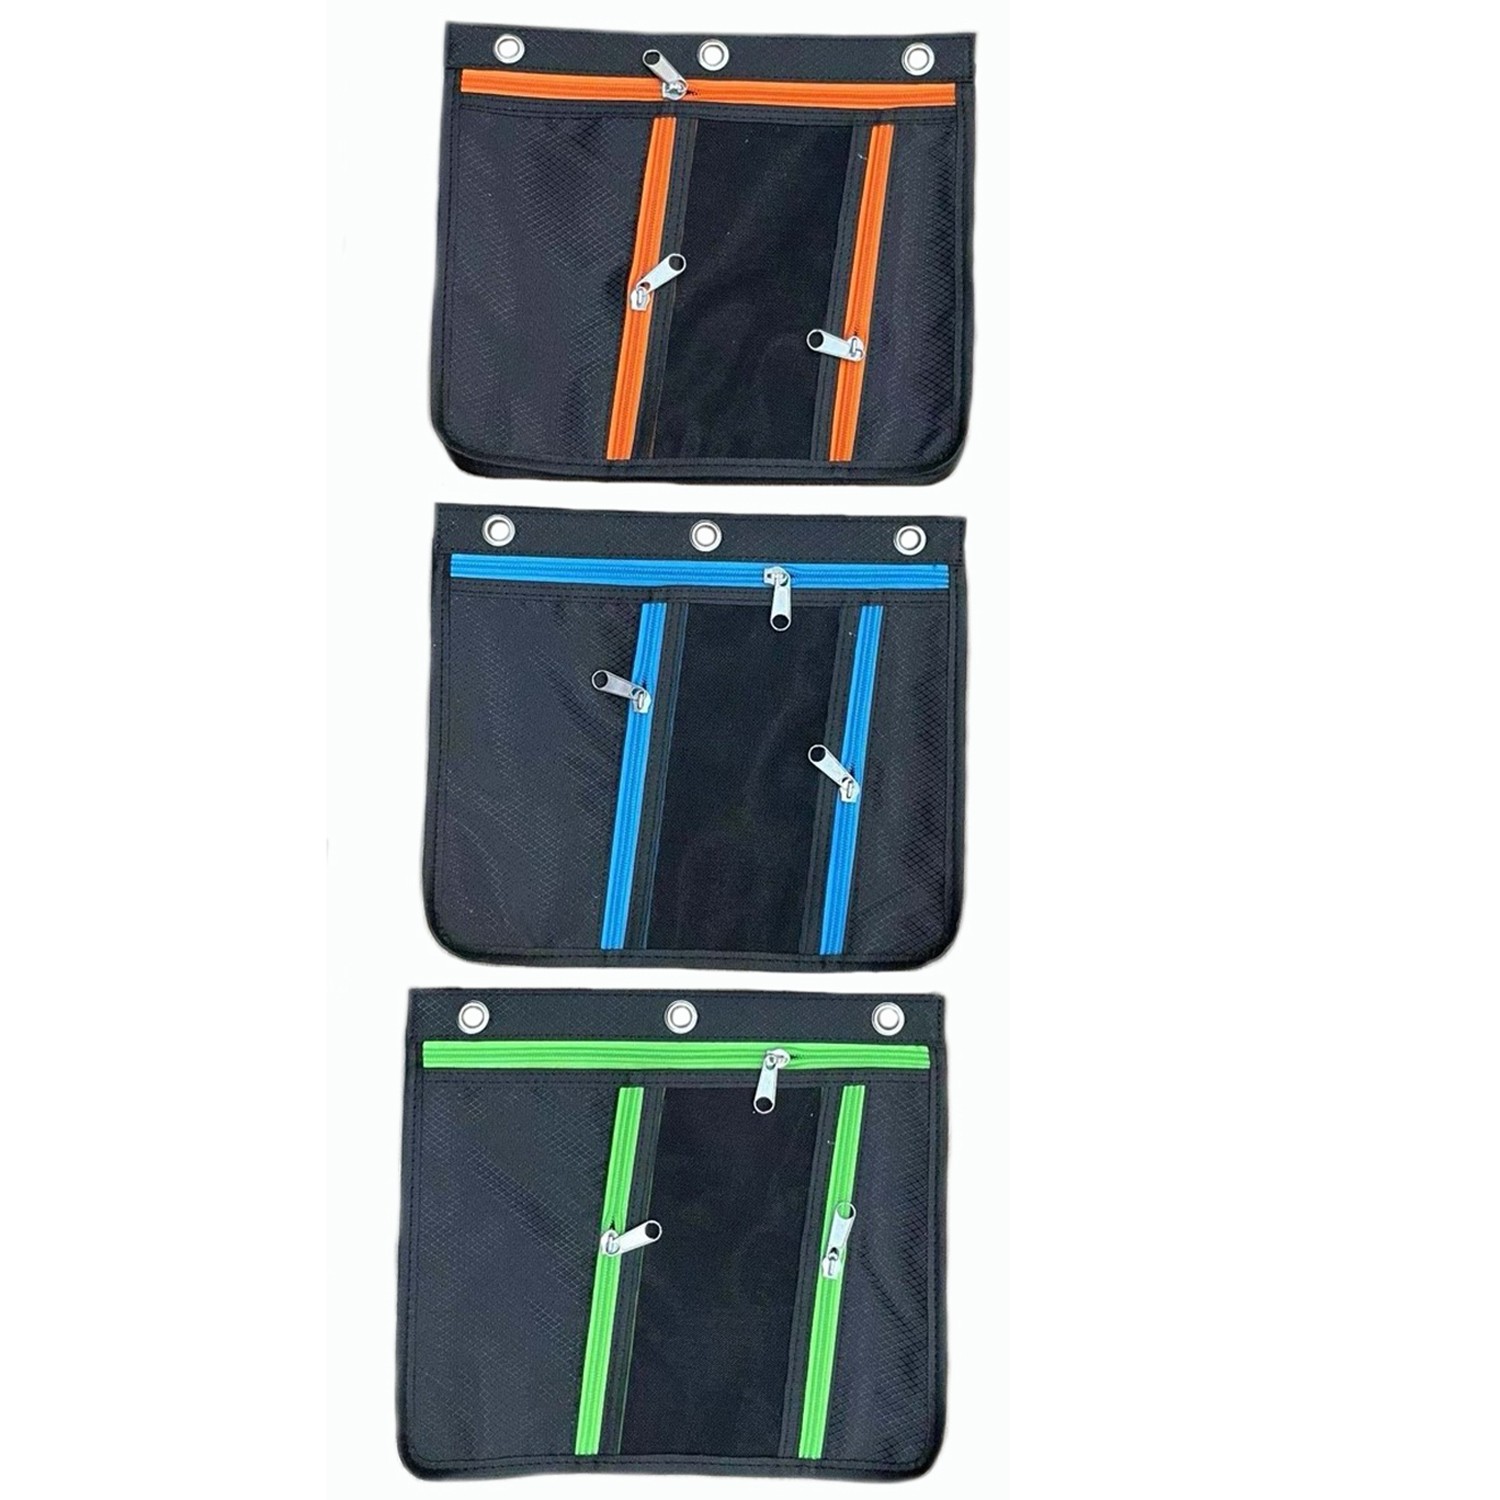 Expanding Pencil Pouch, 3 Pocket, 11"W x 9.5"H x 1"D, Assorted Colors, Pack of 24